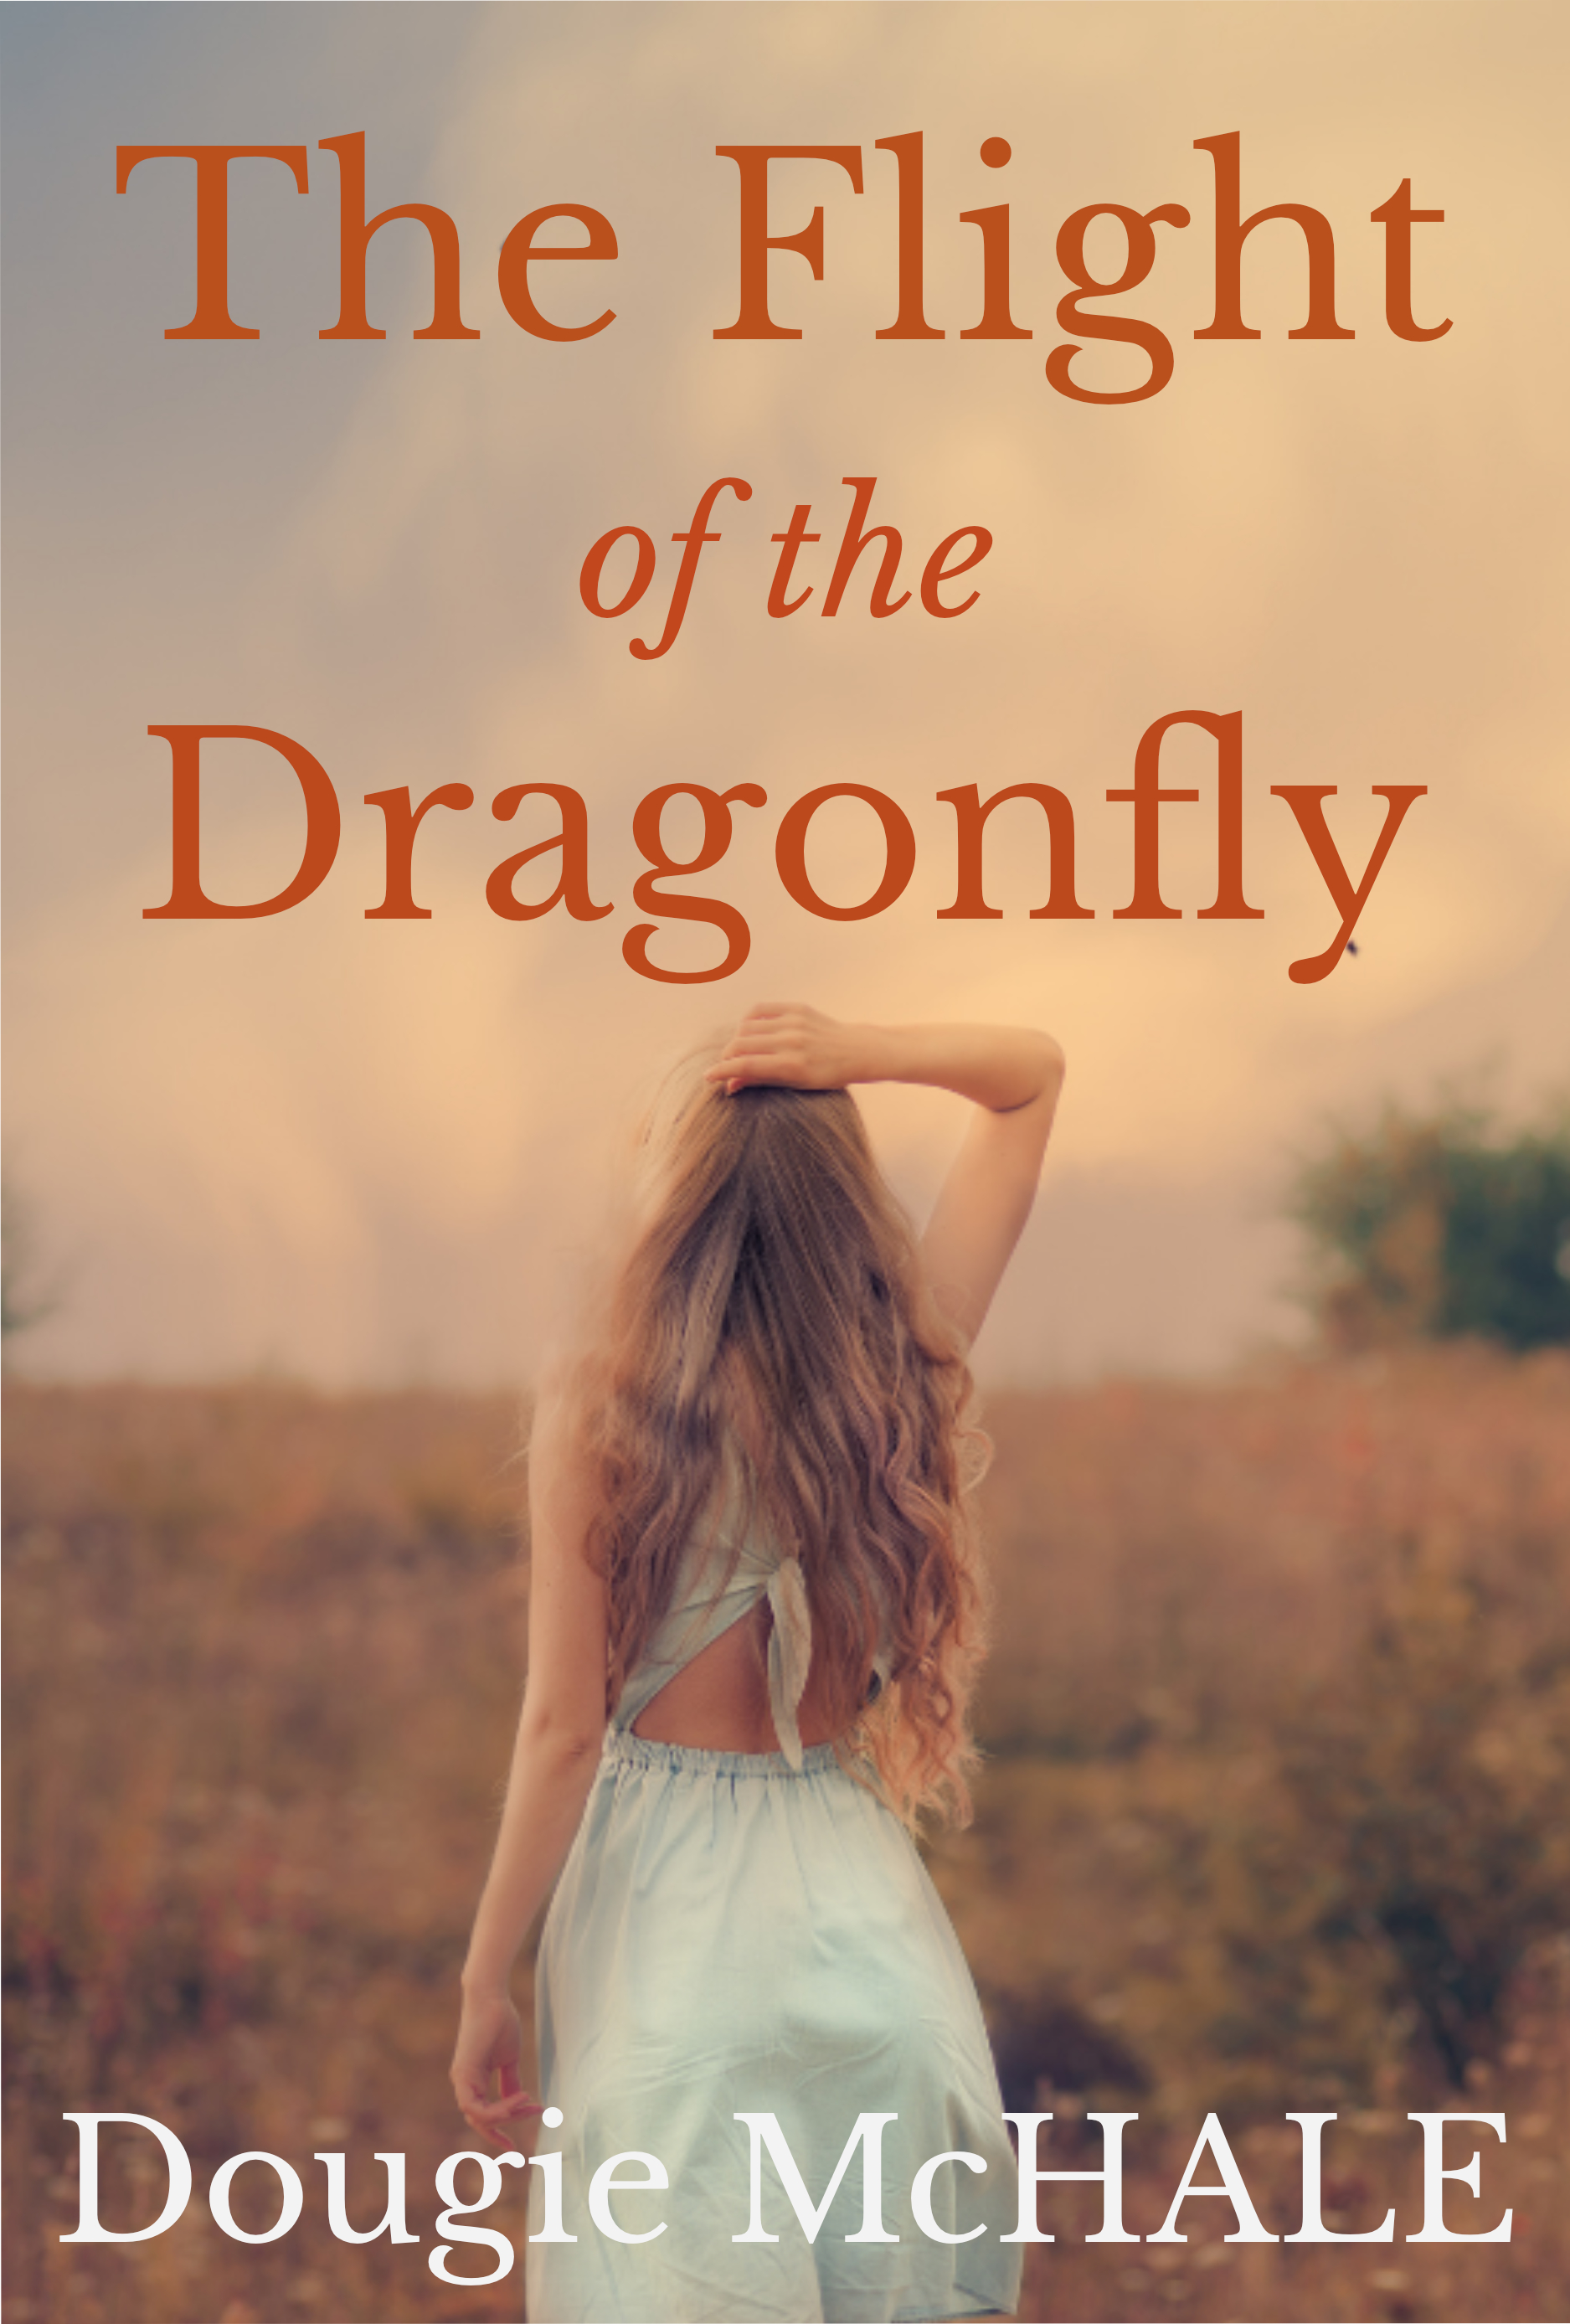 The Flight of the Dragonfly book cover